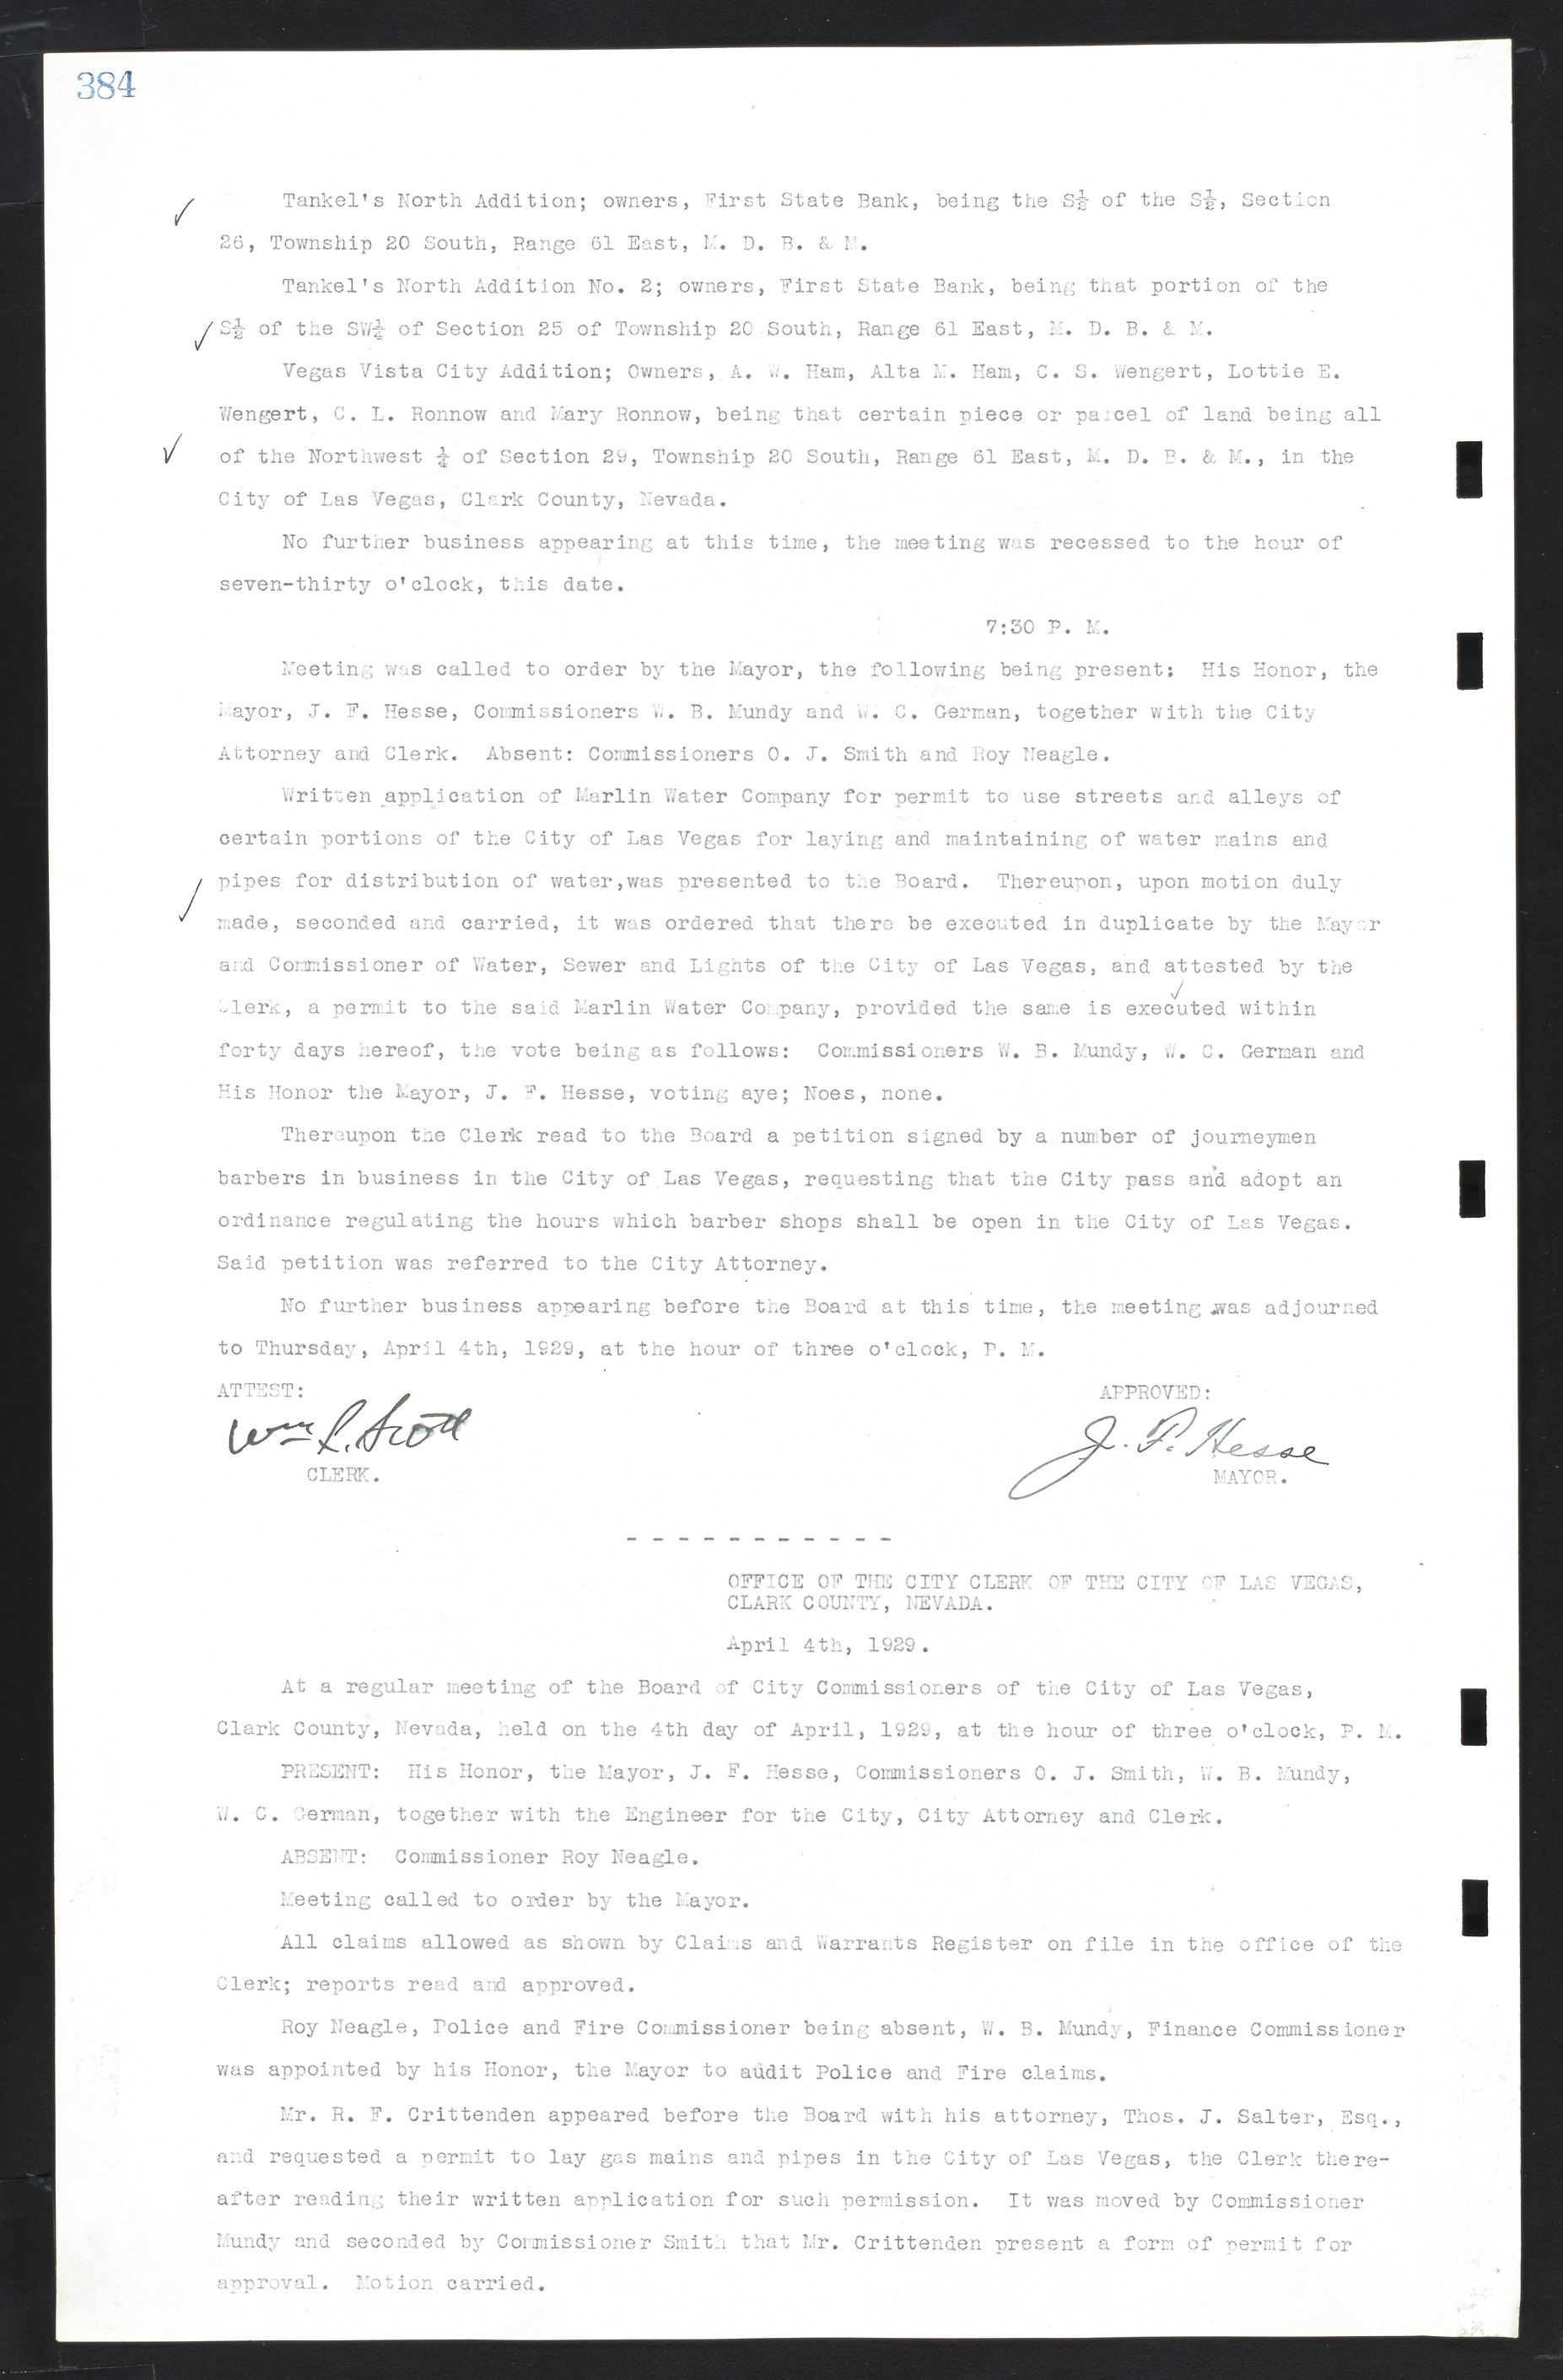 Las Vegas City Commission Minutes, March 1, 1922 to May 10, 1929, lvc000002-393